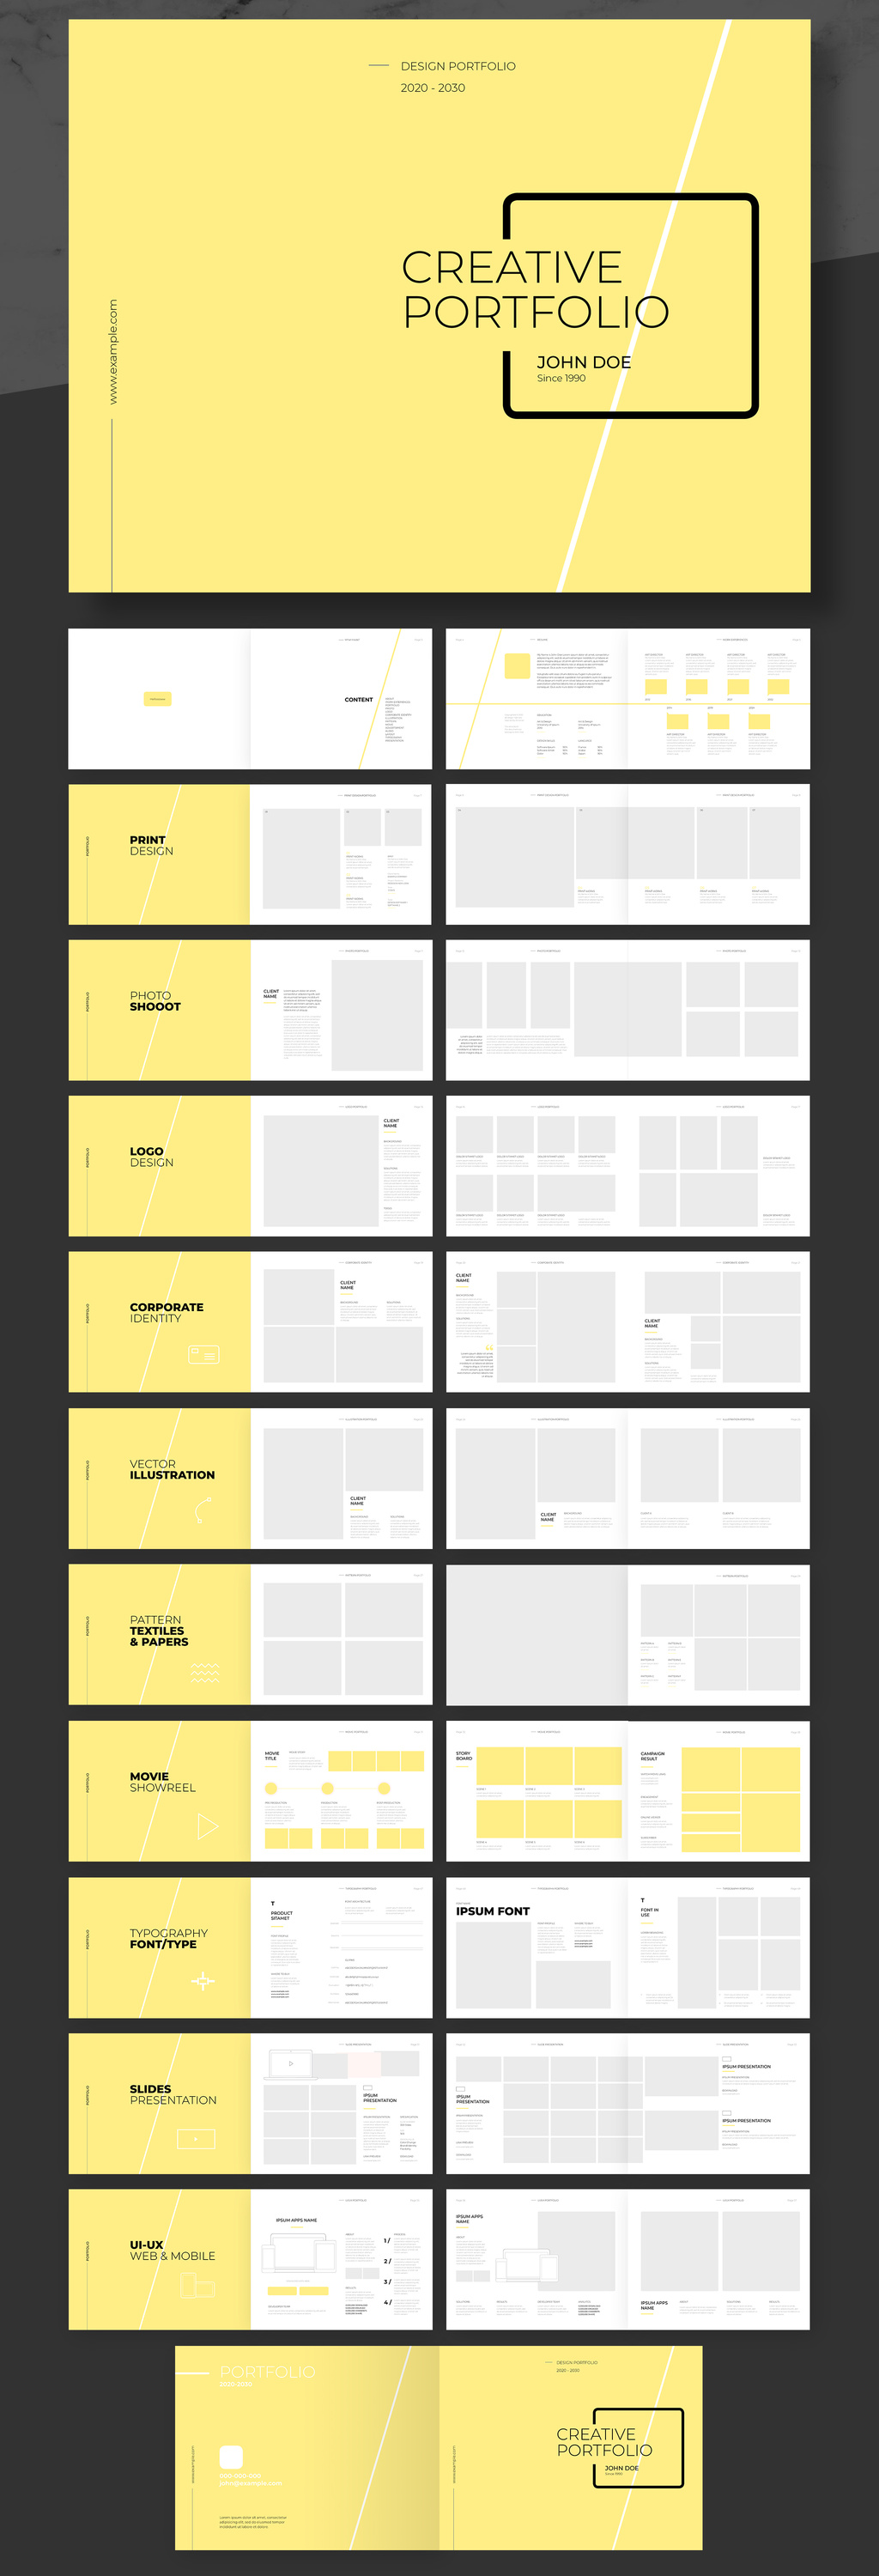 Personal and agency portfolio template with yellow accents from @afahmy.